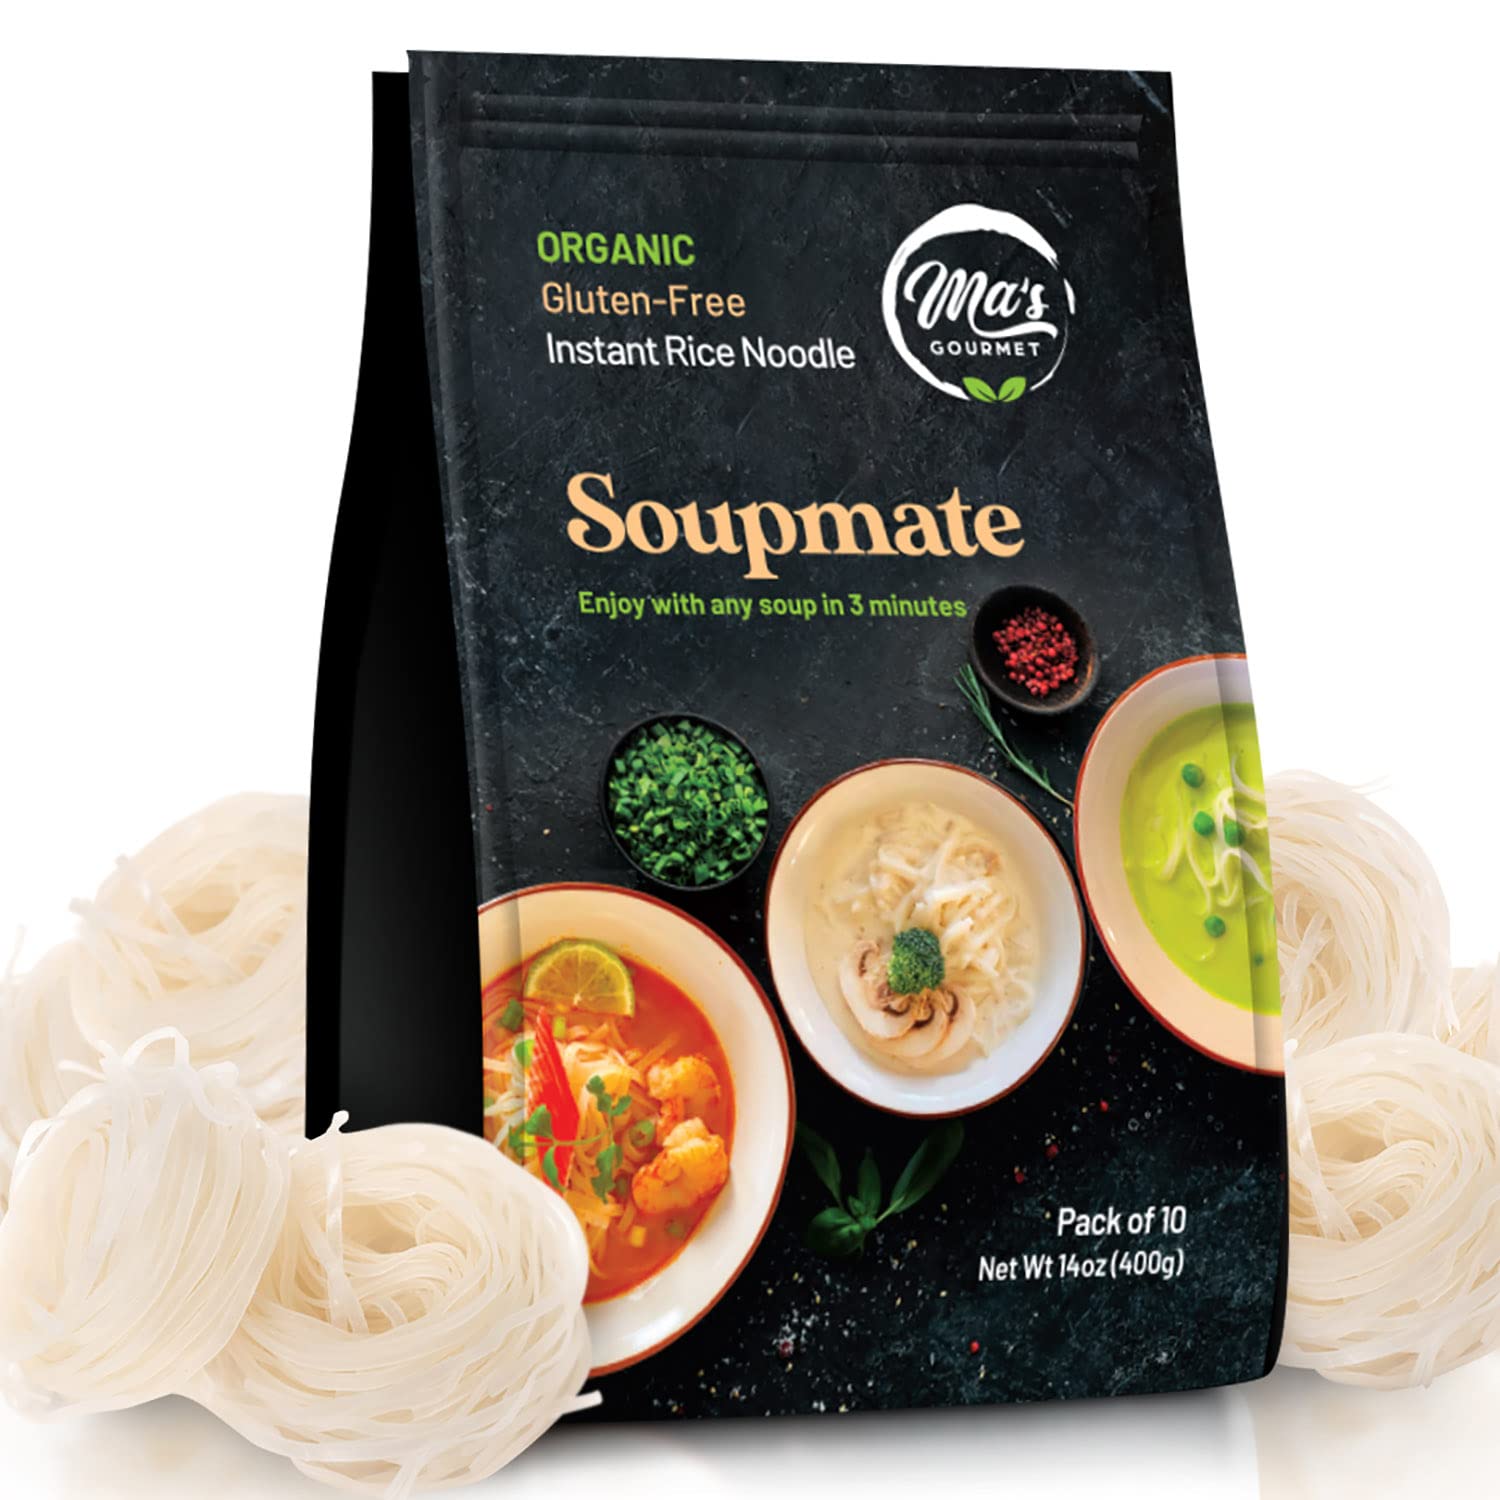 Soupmate Organic Instant Rice Noodles, Gluten Free, Pack of 10